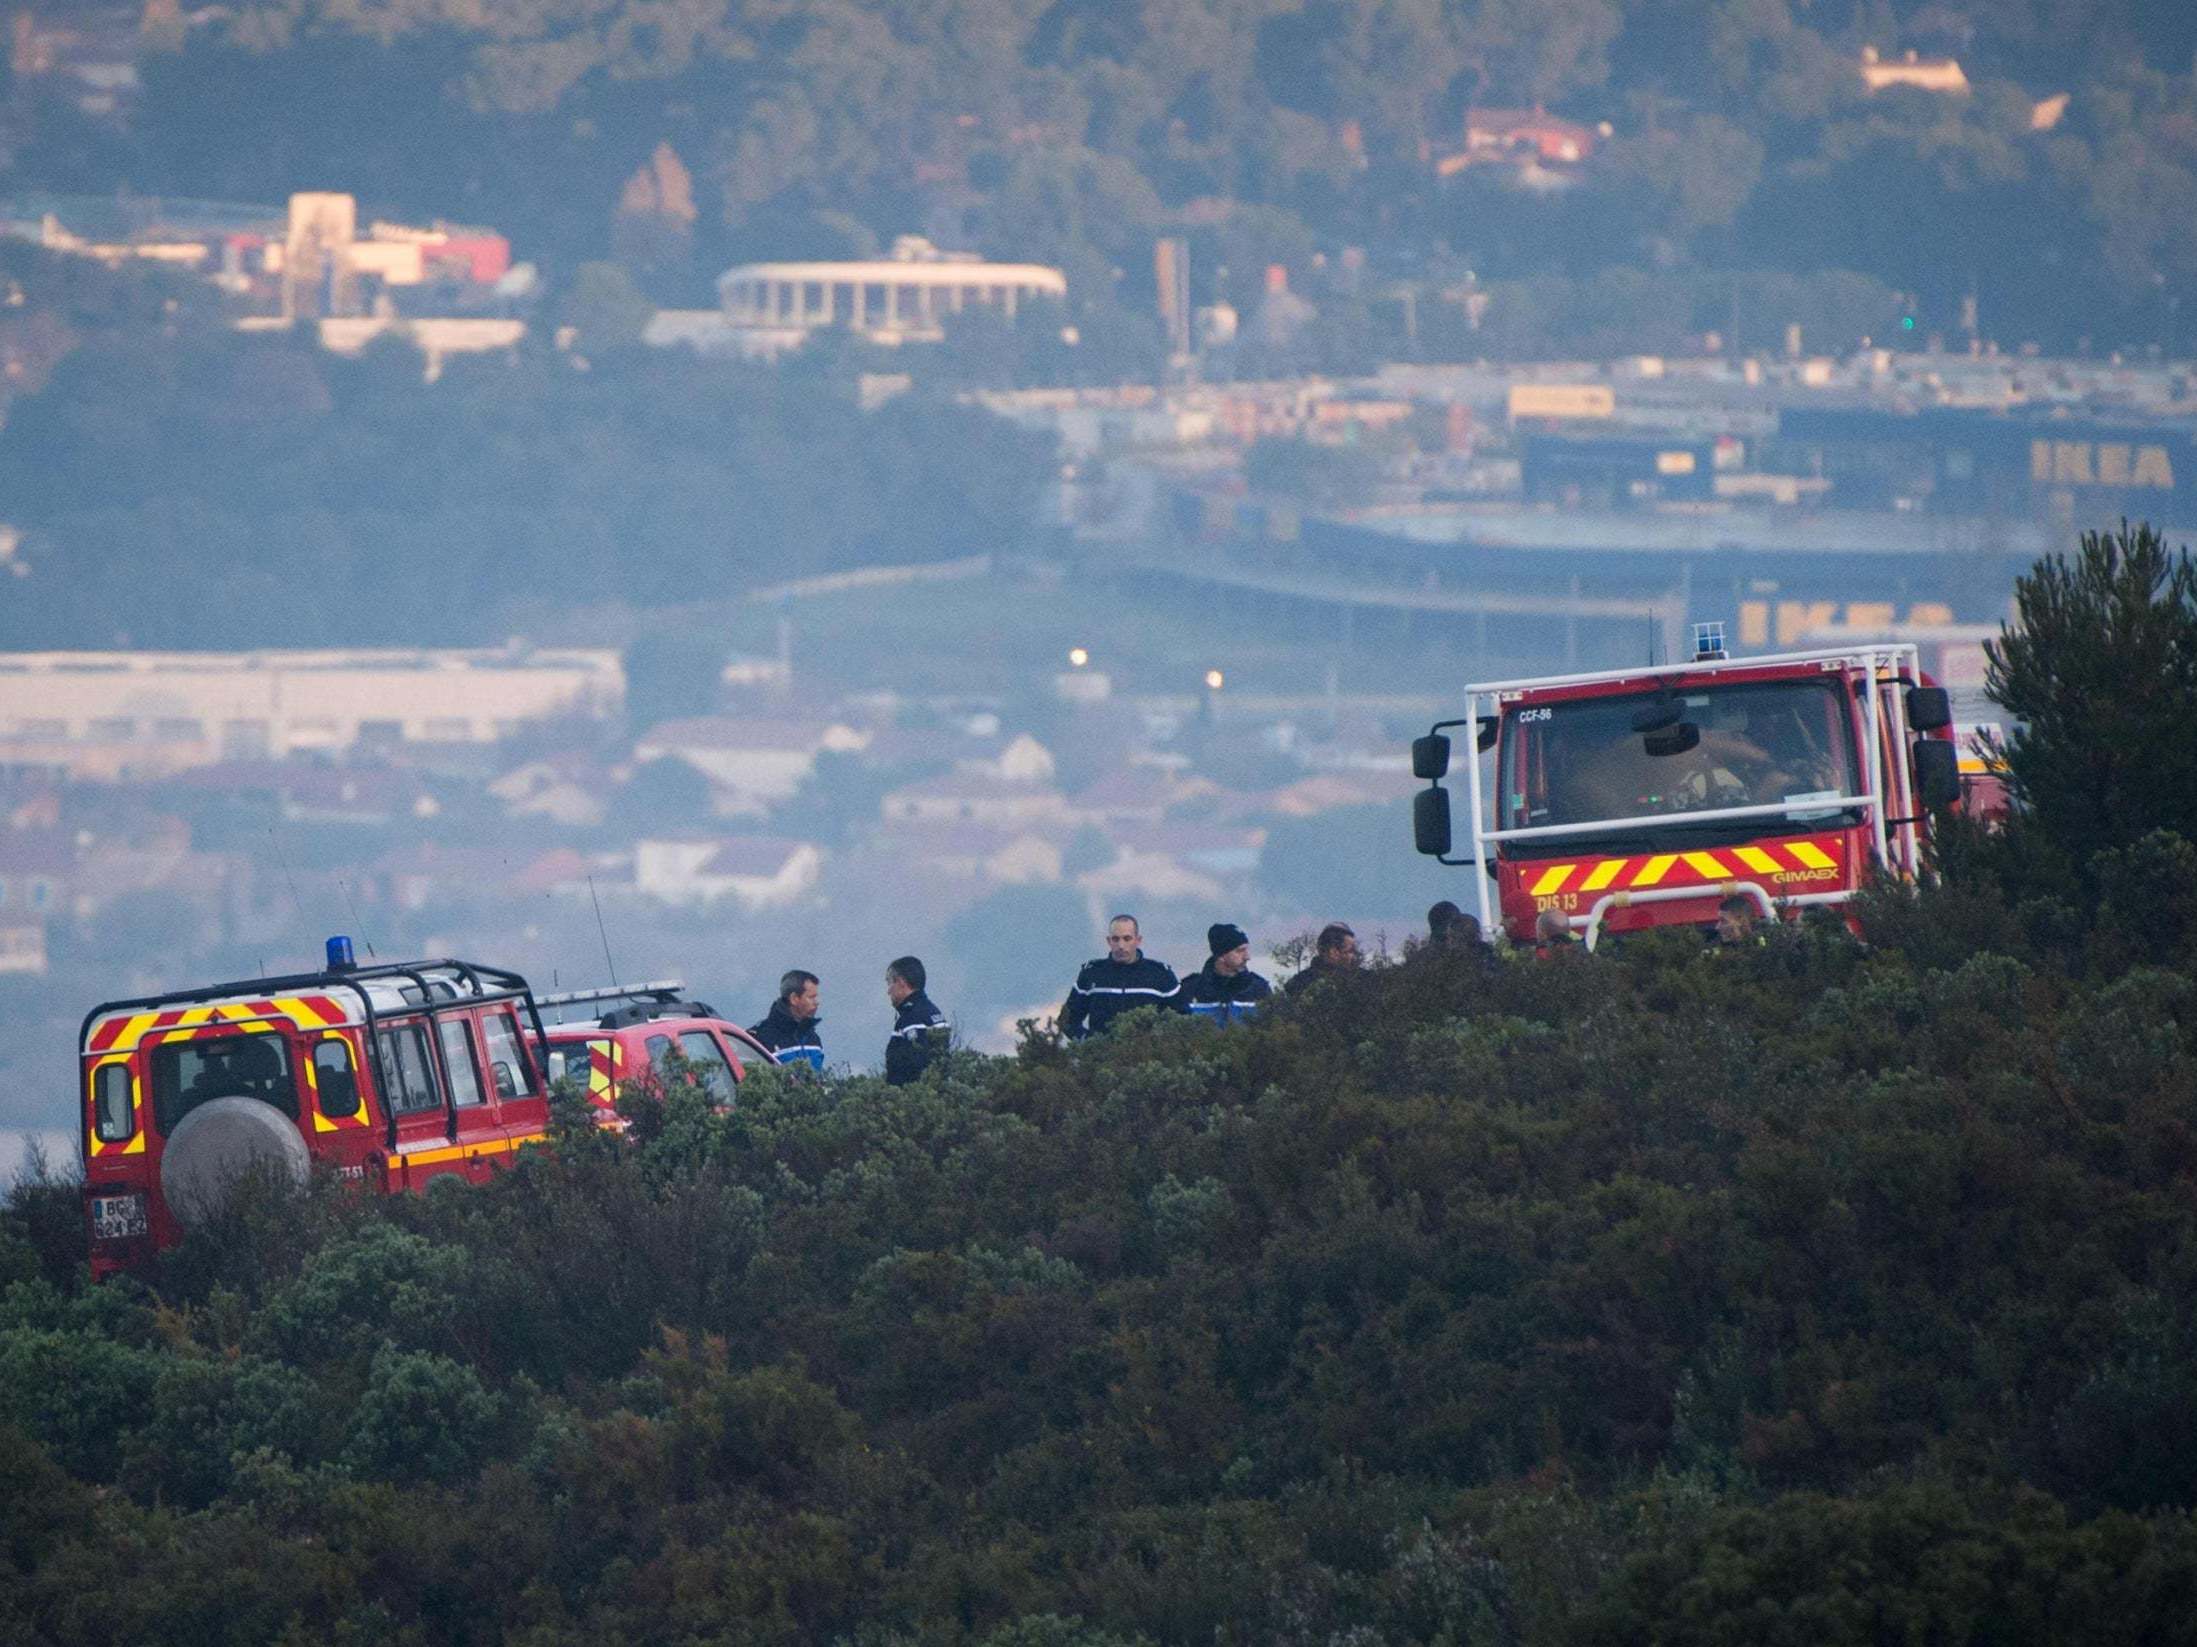 Emergency service personnel secure the area around the site where a helicopter from the civil security services crashed in the hills in Le Rove, outside Marseille, in the early hours of 2 December